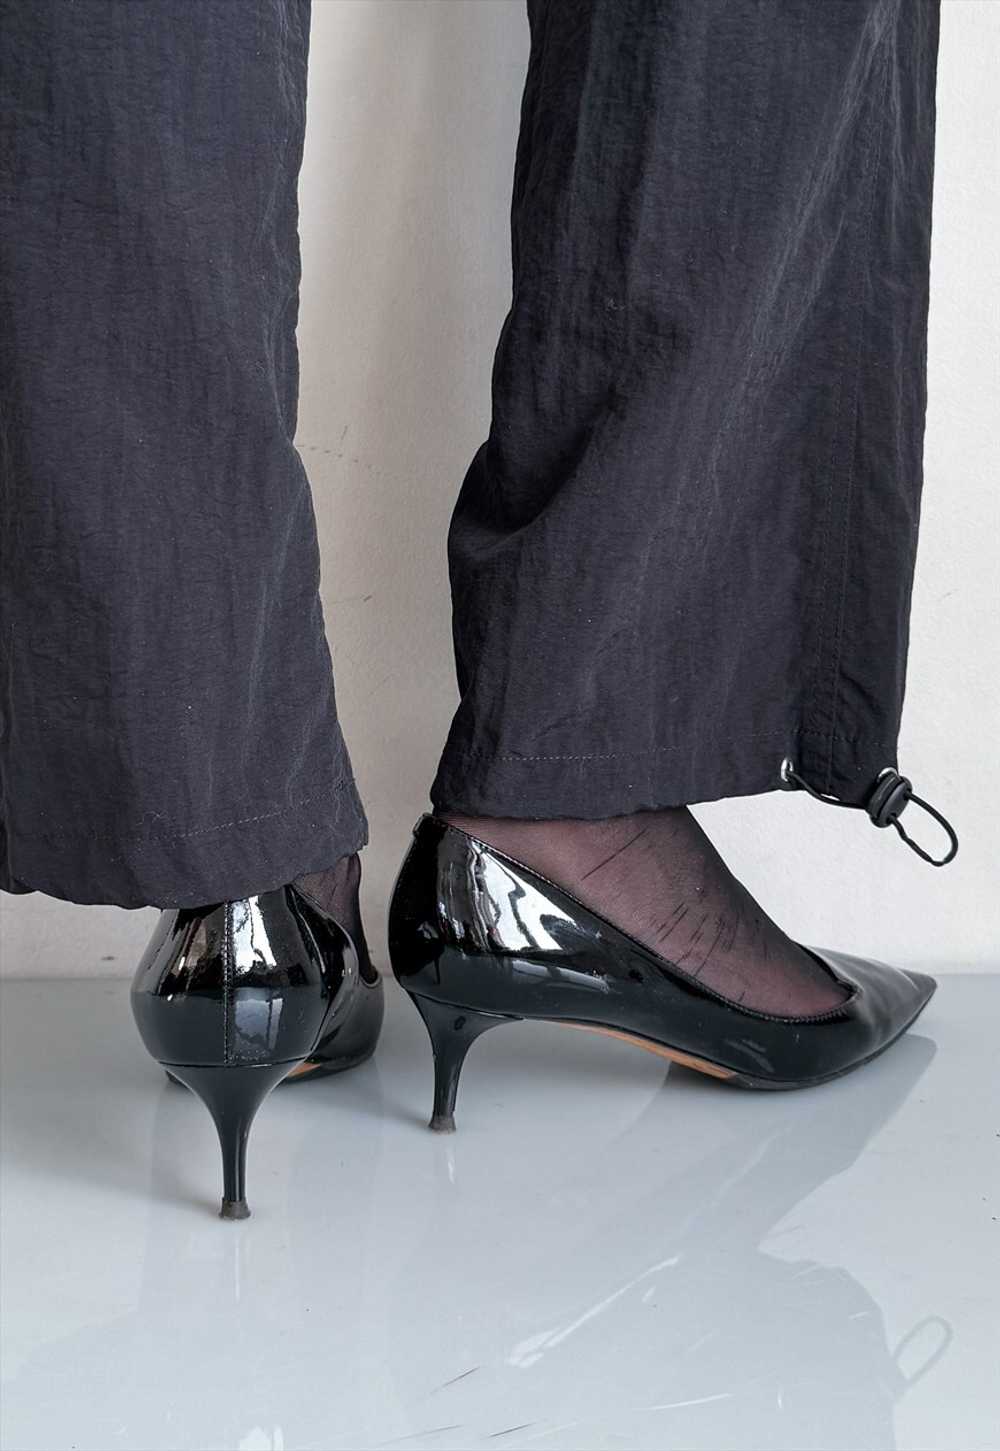 Vintage Y2K classy patent leather pumps in shiny … - image 2